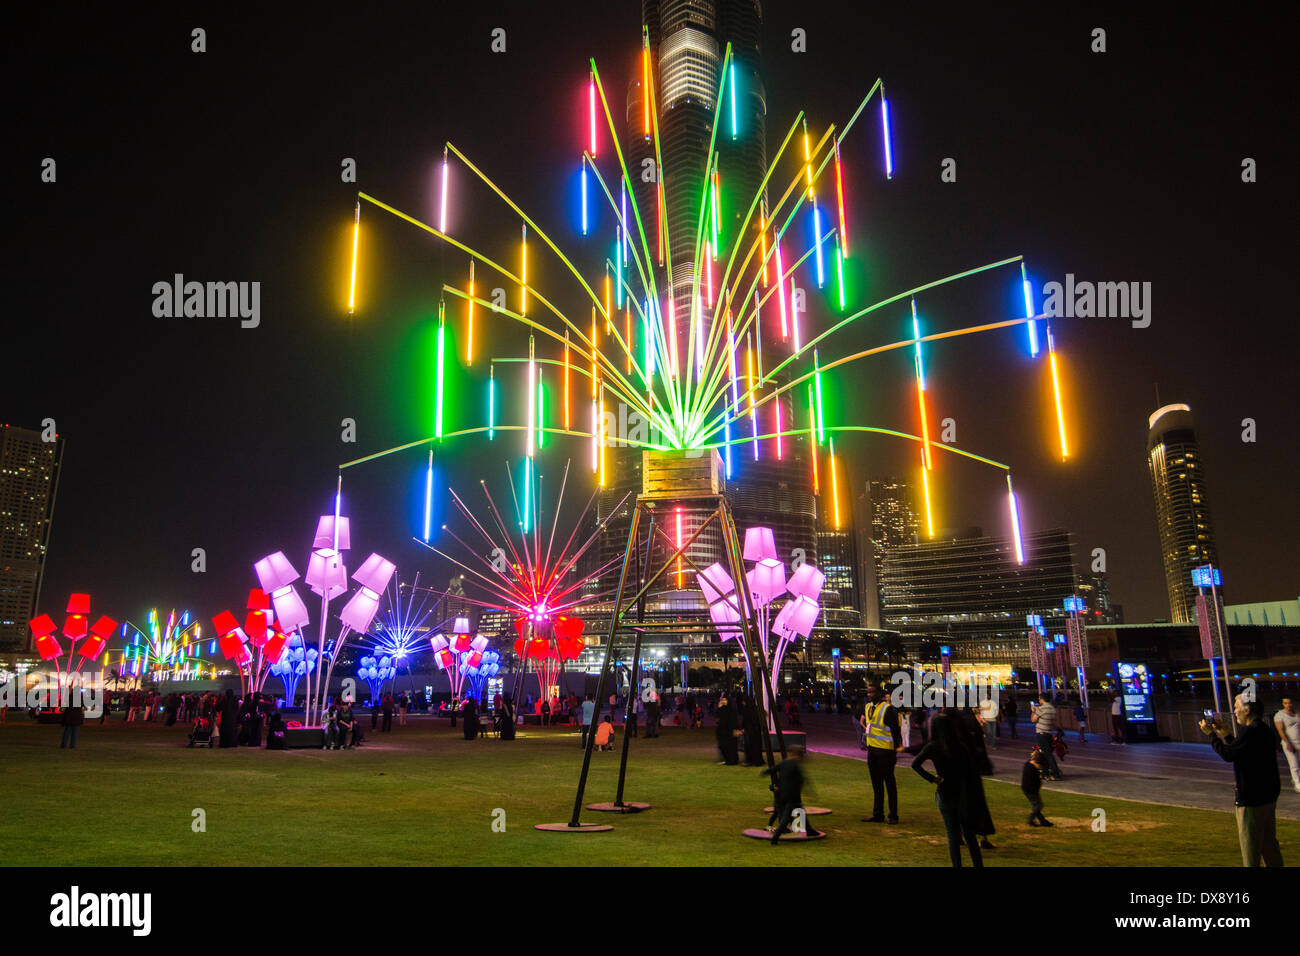 Dubai, United Arab Emirates 2014; Ombrellum light sculptures by Tilt studio at opening night of the inaugural Dubai Festival of Lights held in Downtown area with many light and video based works of art Credit:  Iain Masterton/Alamy Live News Stock Photo